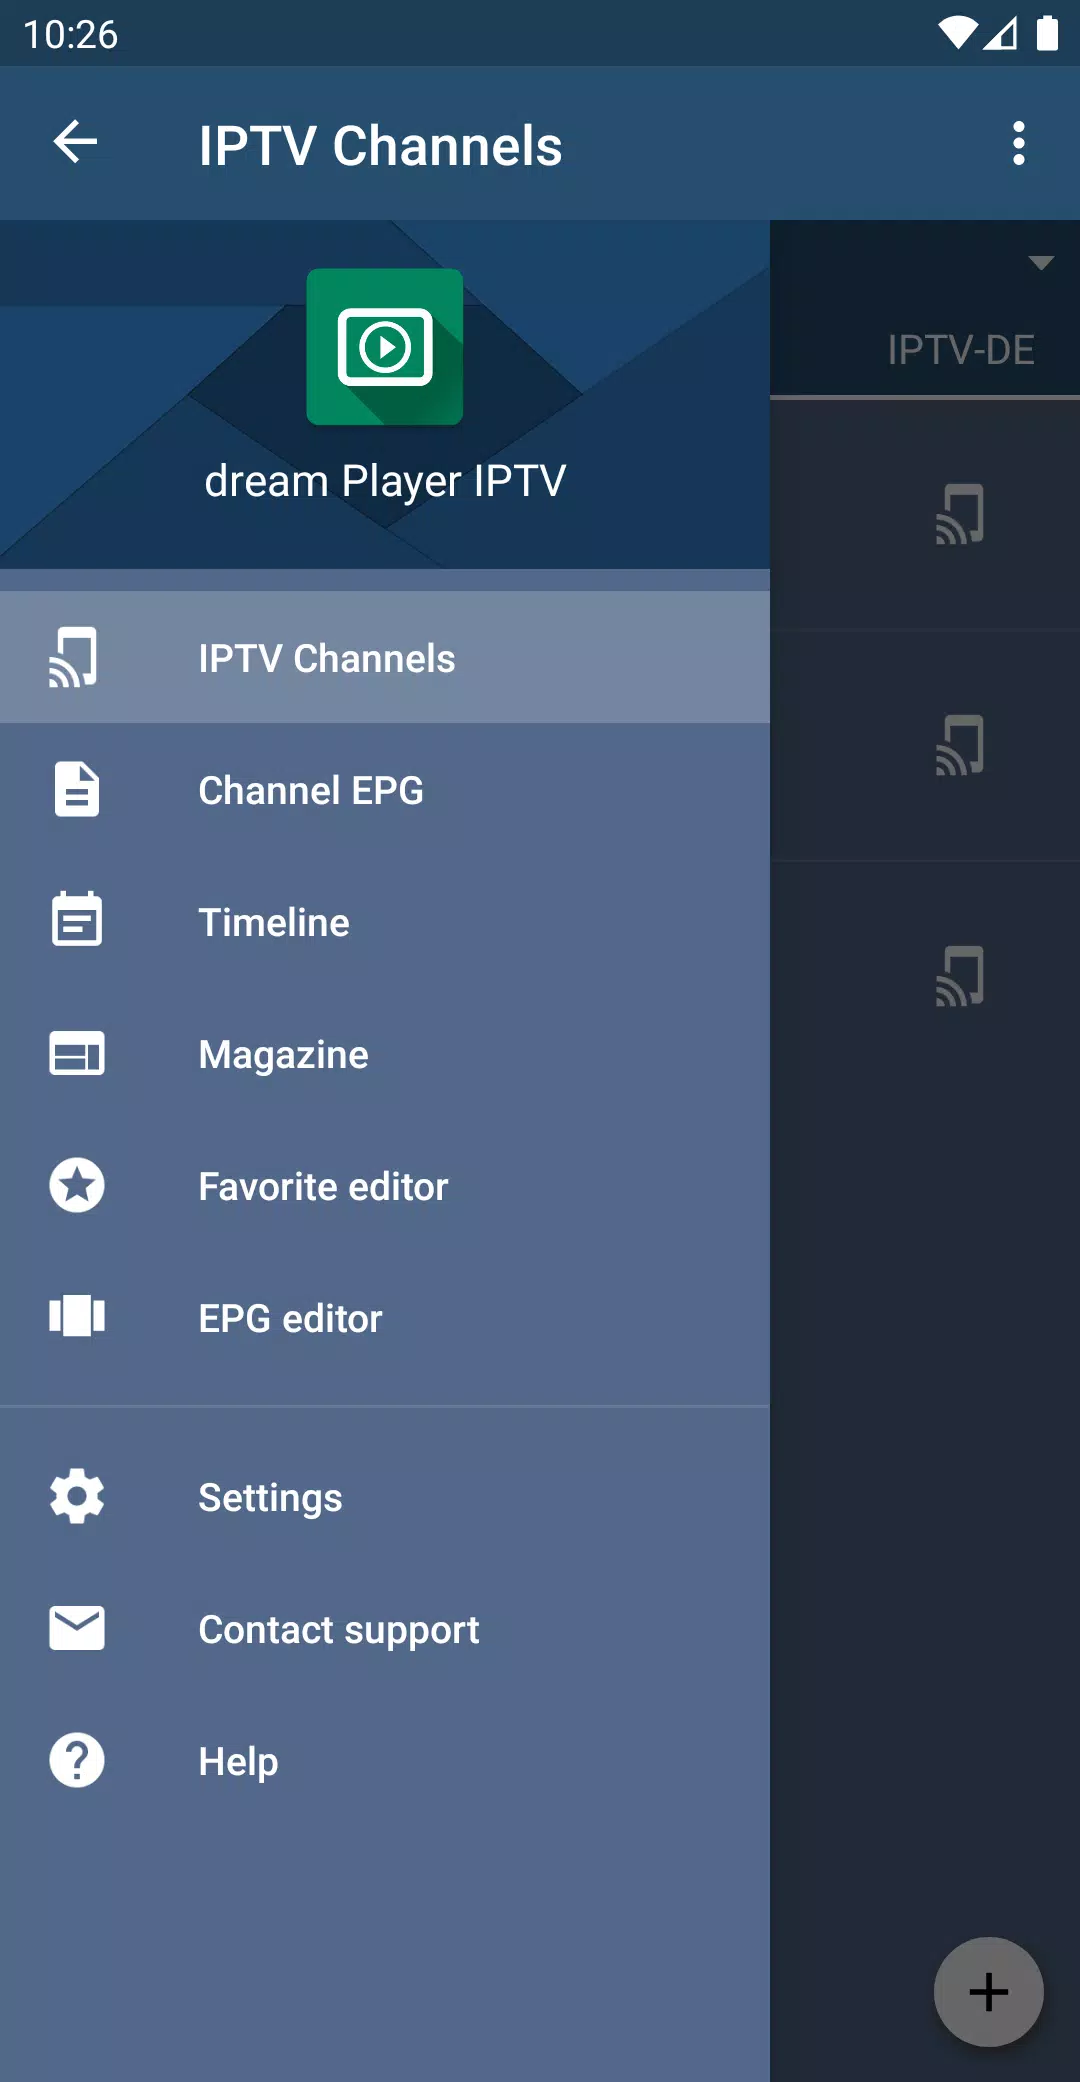 dream Player IPTV for Android - APK Download